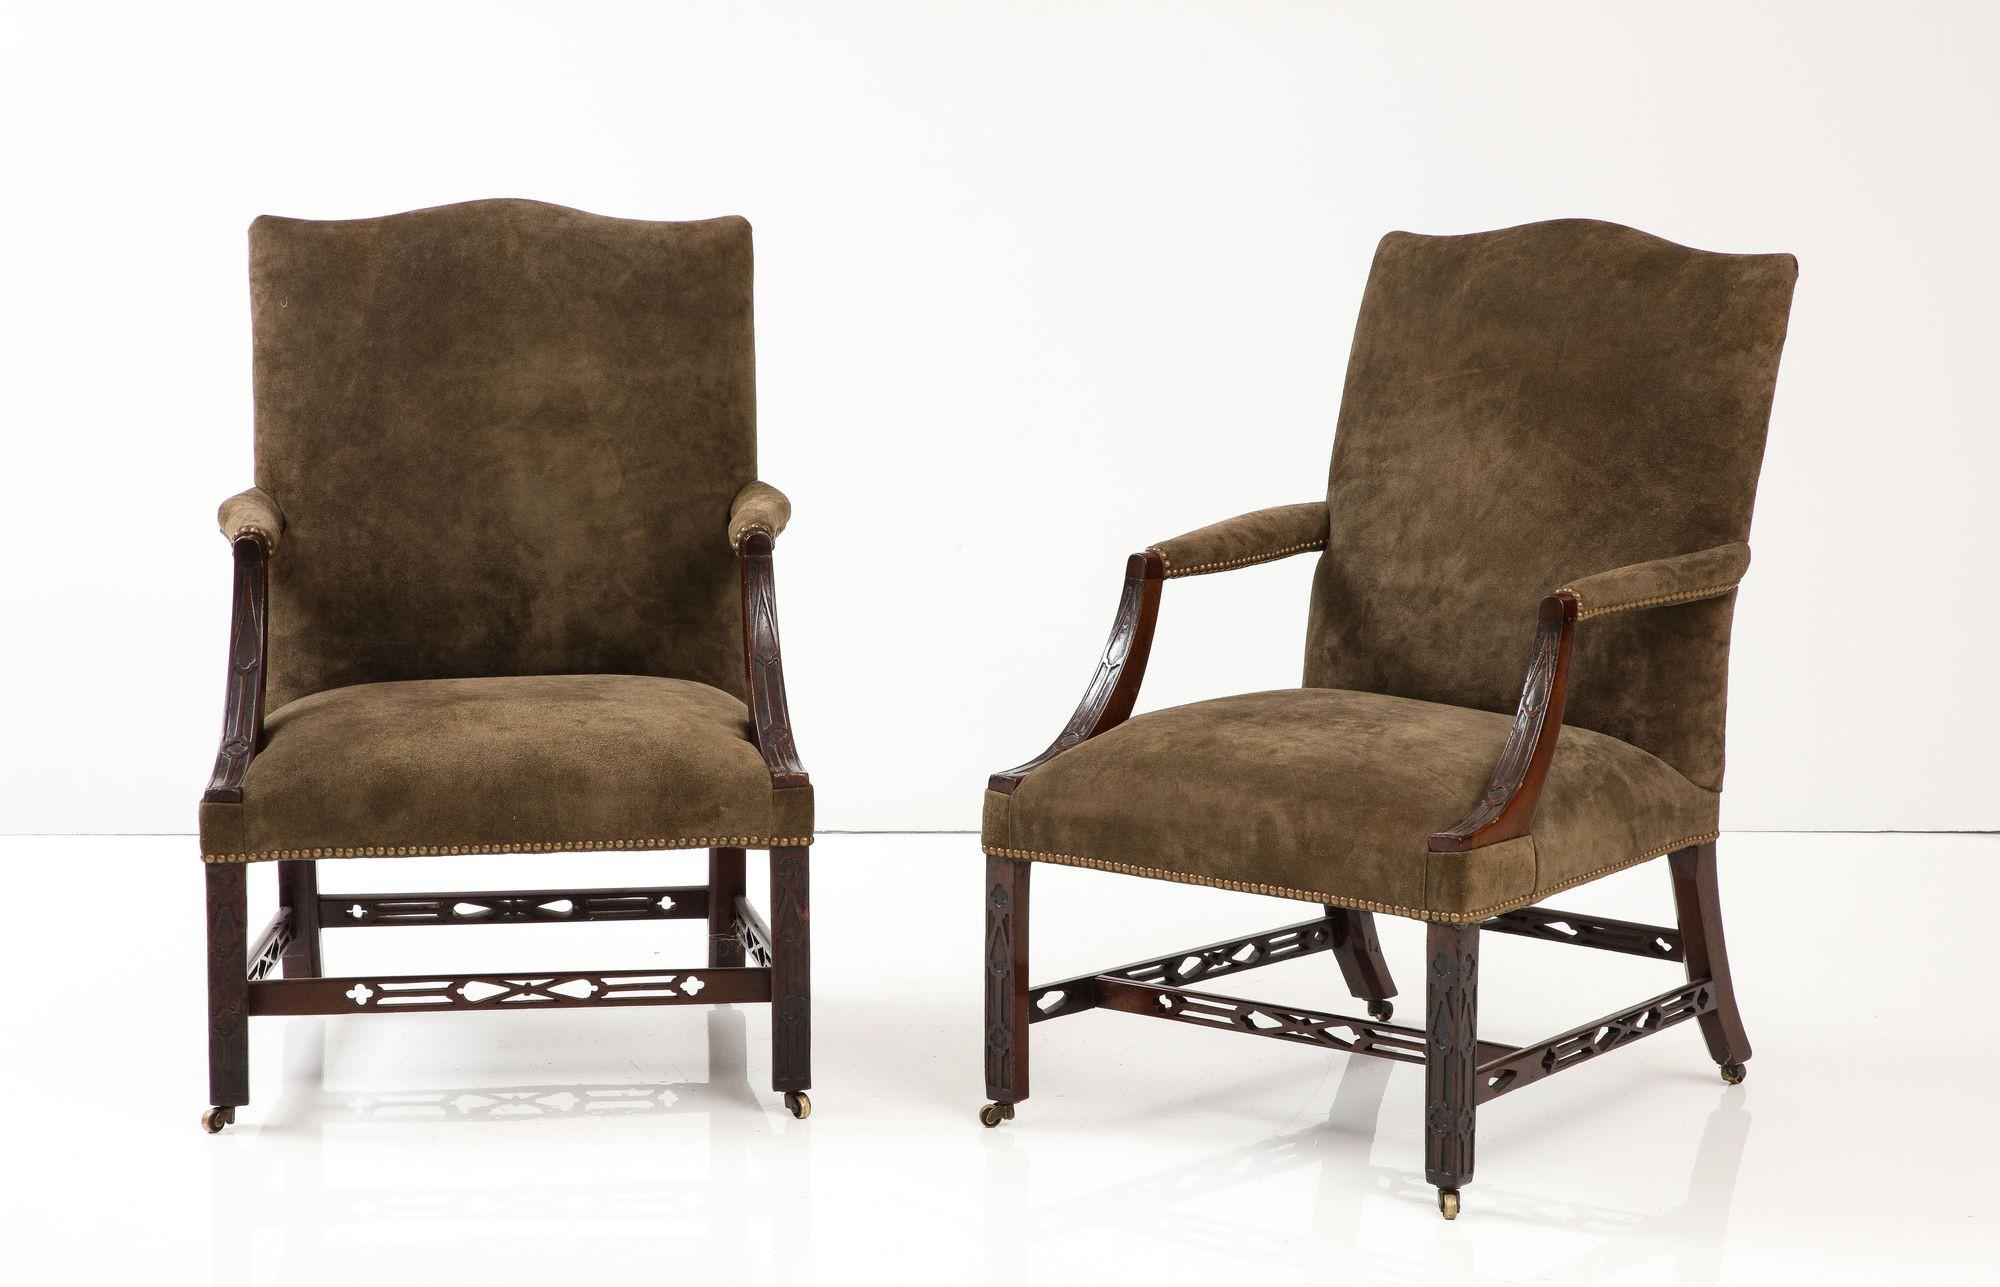 Matched Pair of George III Gainsborough Chairs In Good Condition For Sale In Greenwich, CT